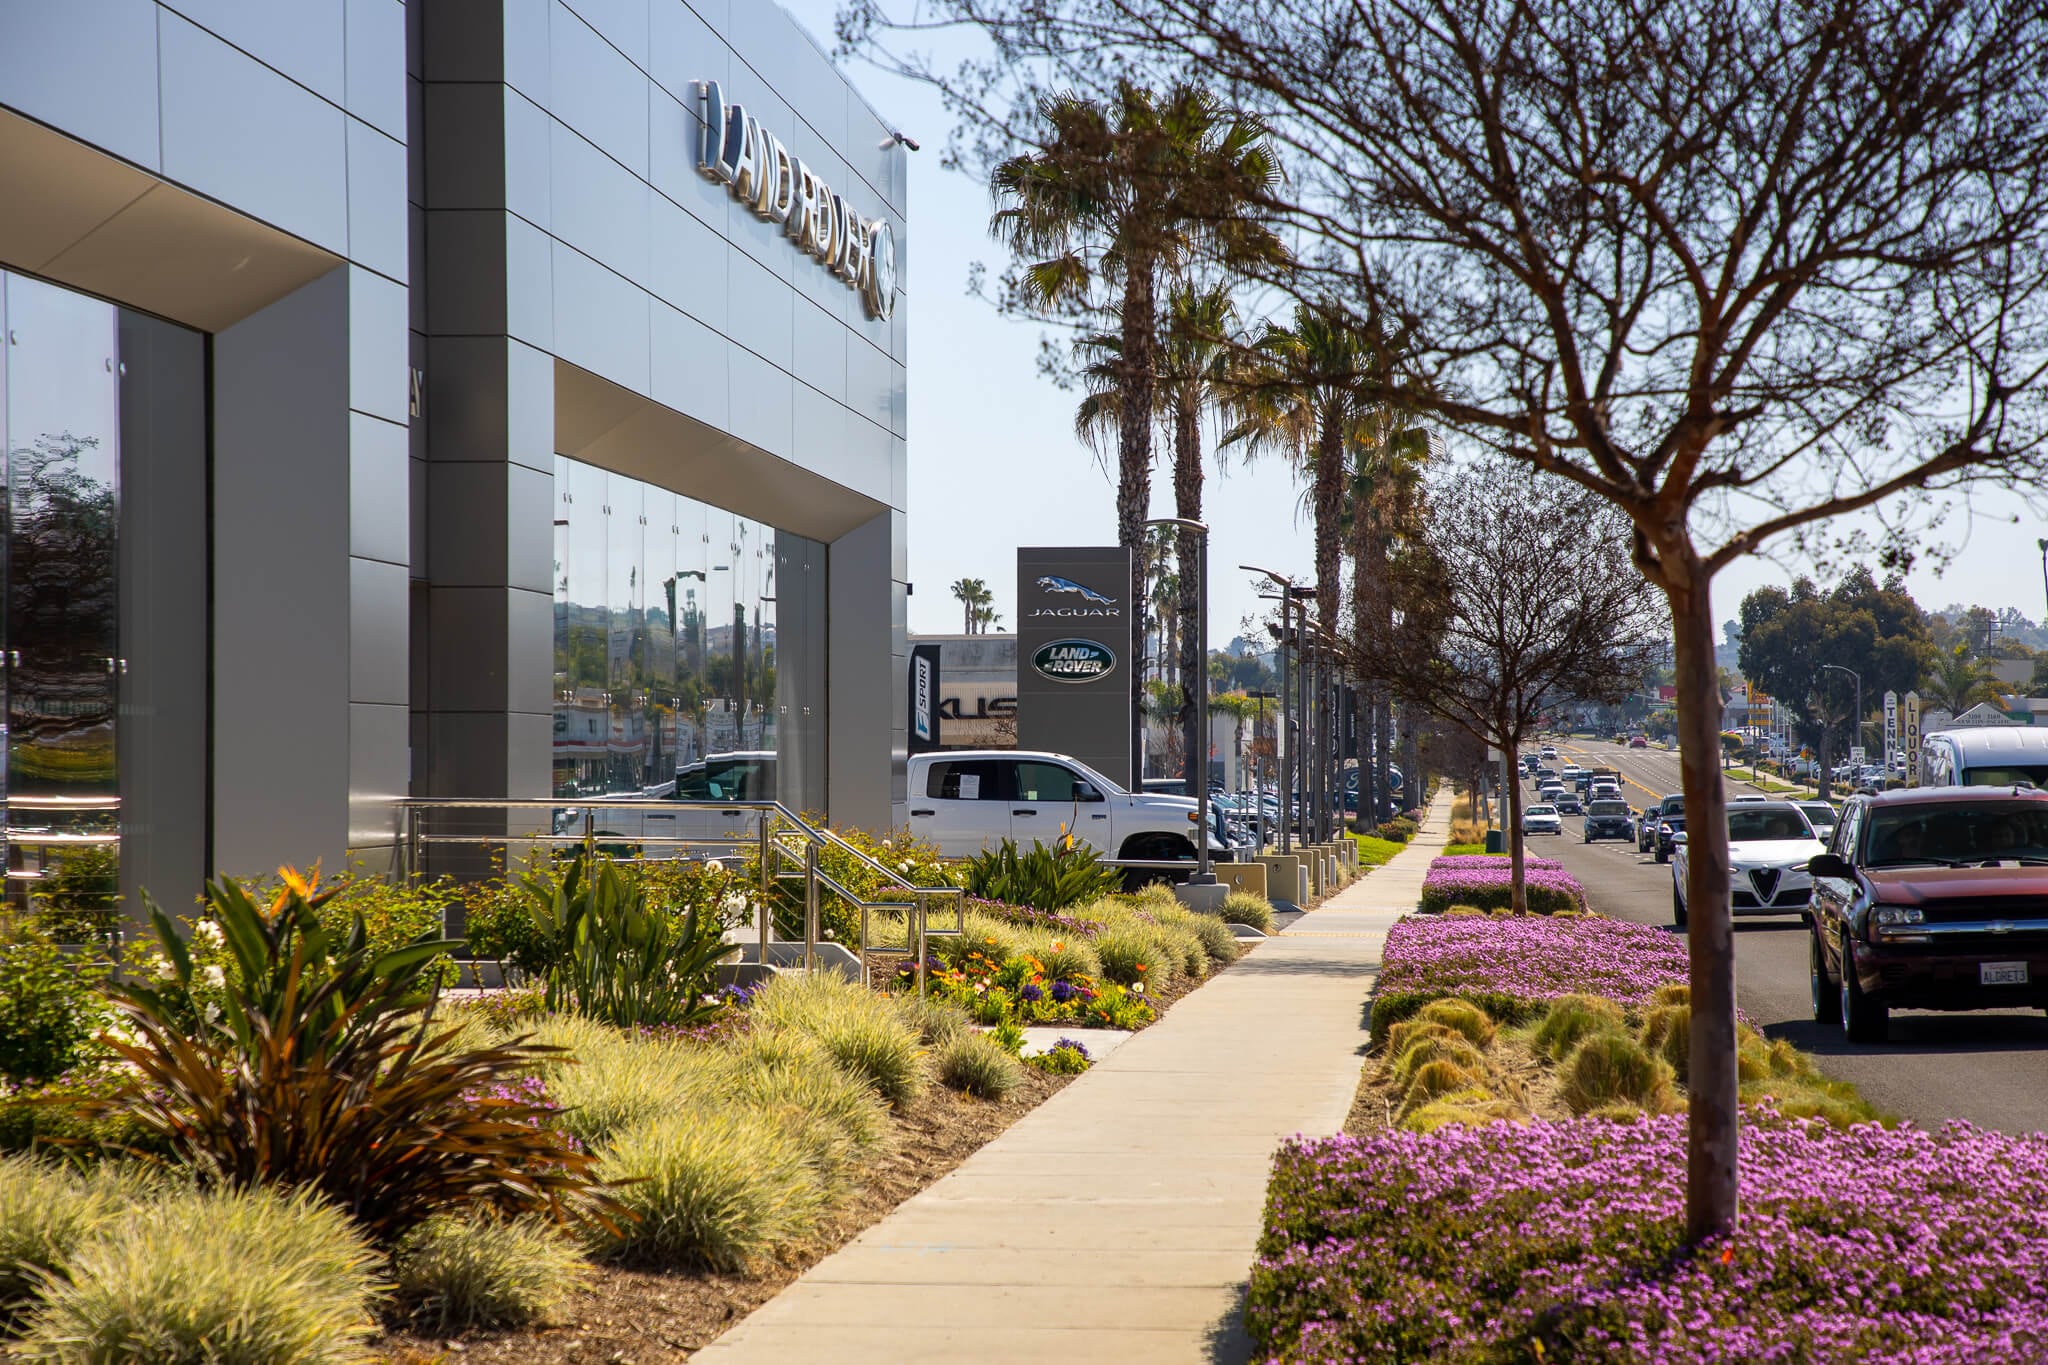 Exterior view of the Jaguar South Bay dealership in Los Angeles